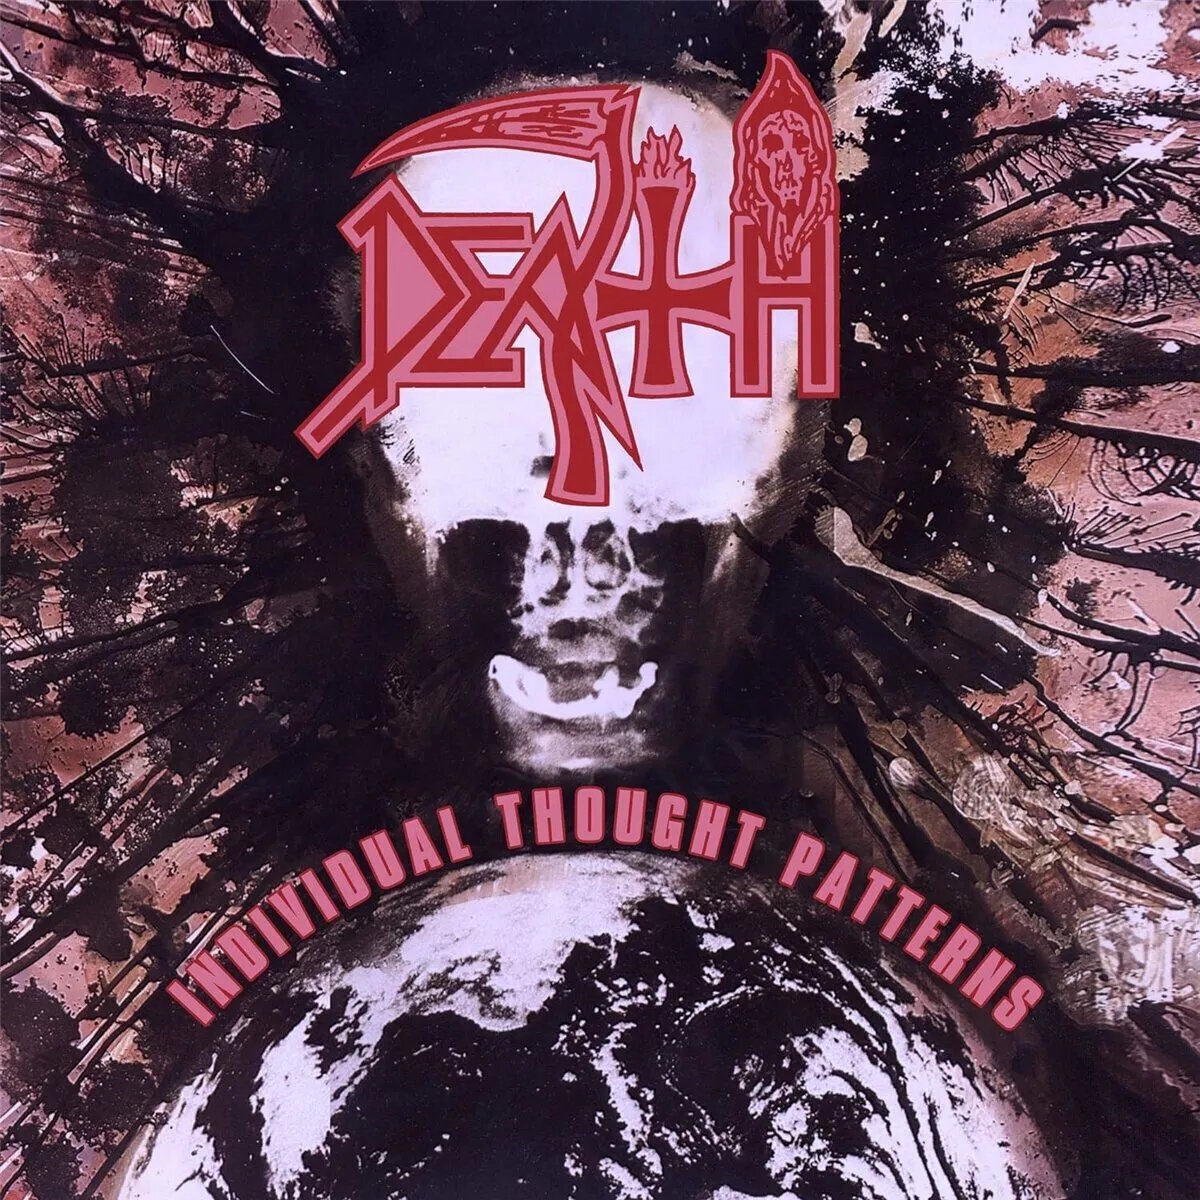 Hanglemez Death - Individual Thought Patterns (Tri Colour Merge Splatter Coloured) (Deluxe Edition) (Limited Edition) (Reissue) (Remastered) (LP)